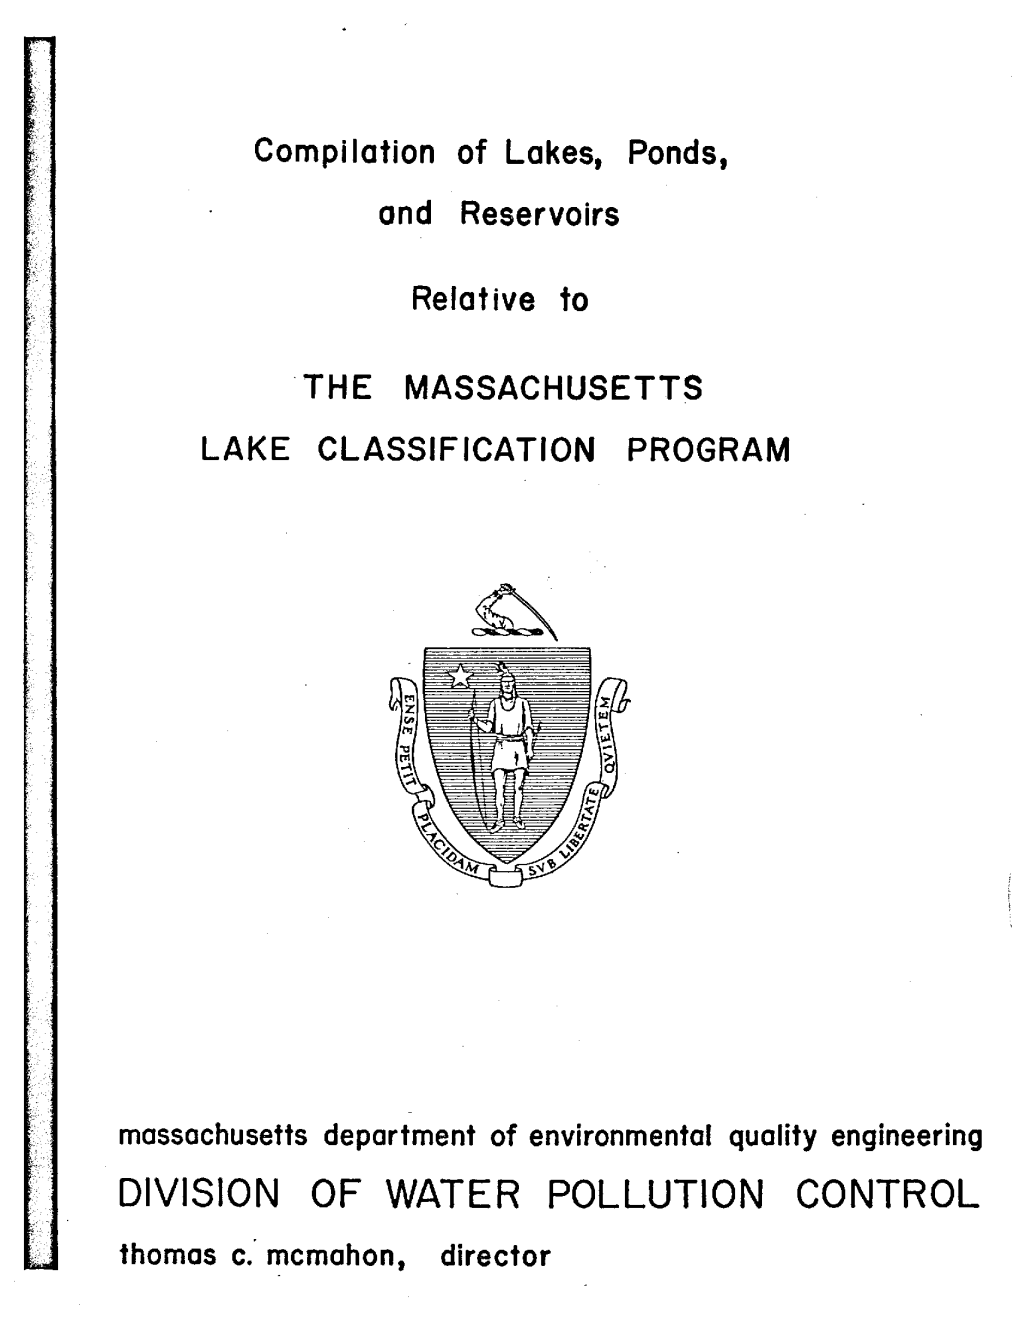 DIVISION of WATER POLLUTION CONTROL Thomas C.· Mcmahon, Director COMPILATIONOF LAKES, PONDS, and RESERVOIRS